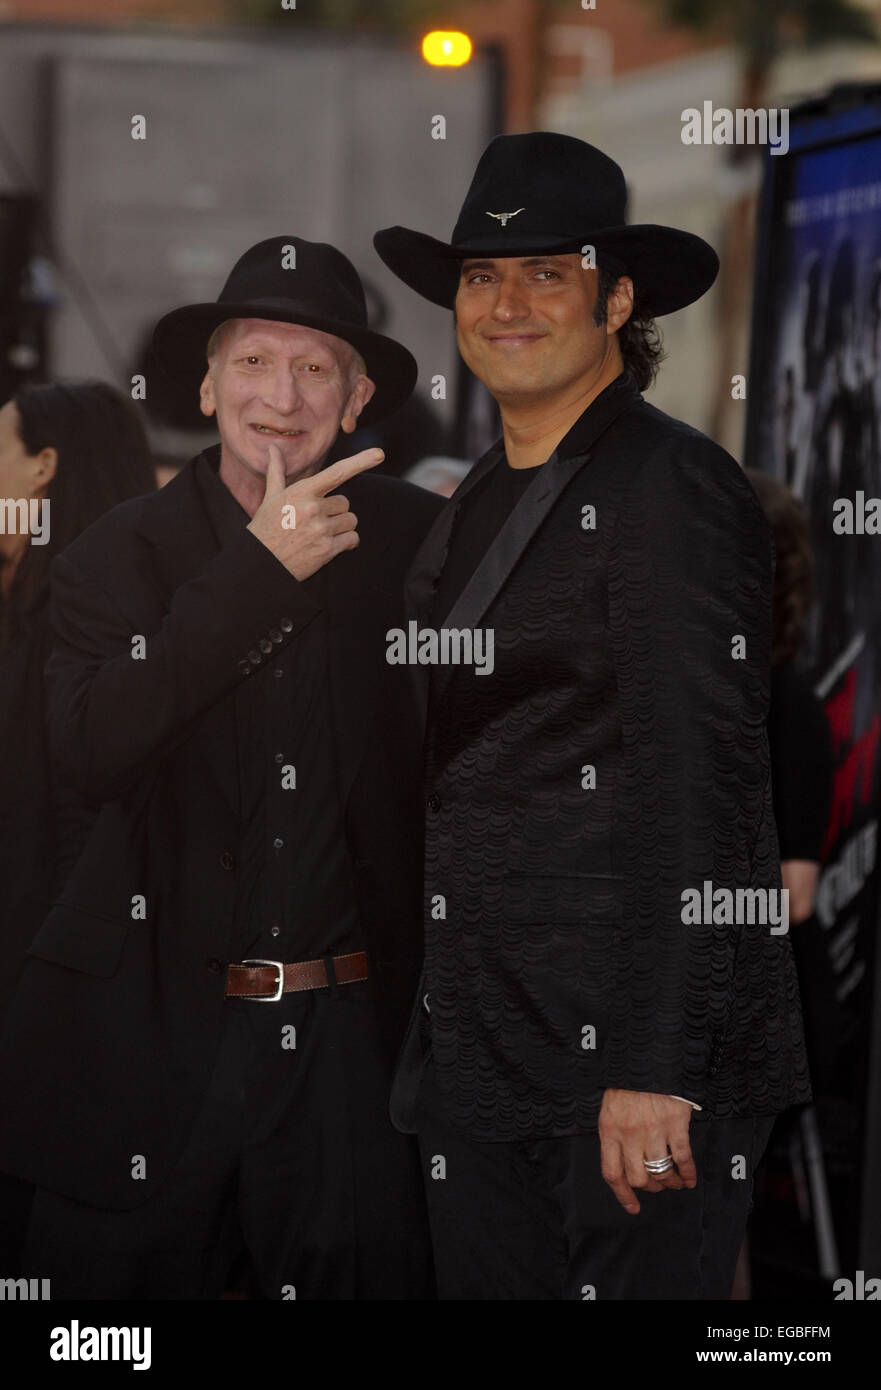 Los Angeles premiere of 'Sin City: A Dame to Kill For' held at the TCL Chinese Theatre Featuring: Frank Miller,Robert Rodriguez Where: Los Angeles, California, United States When: 19 Aug 2014 Stock Photo